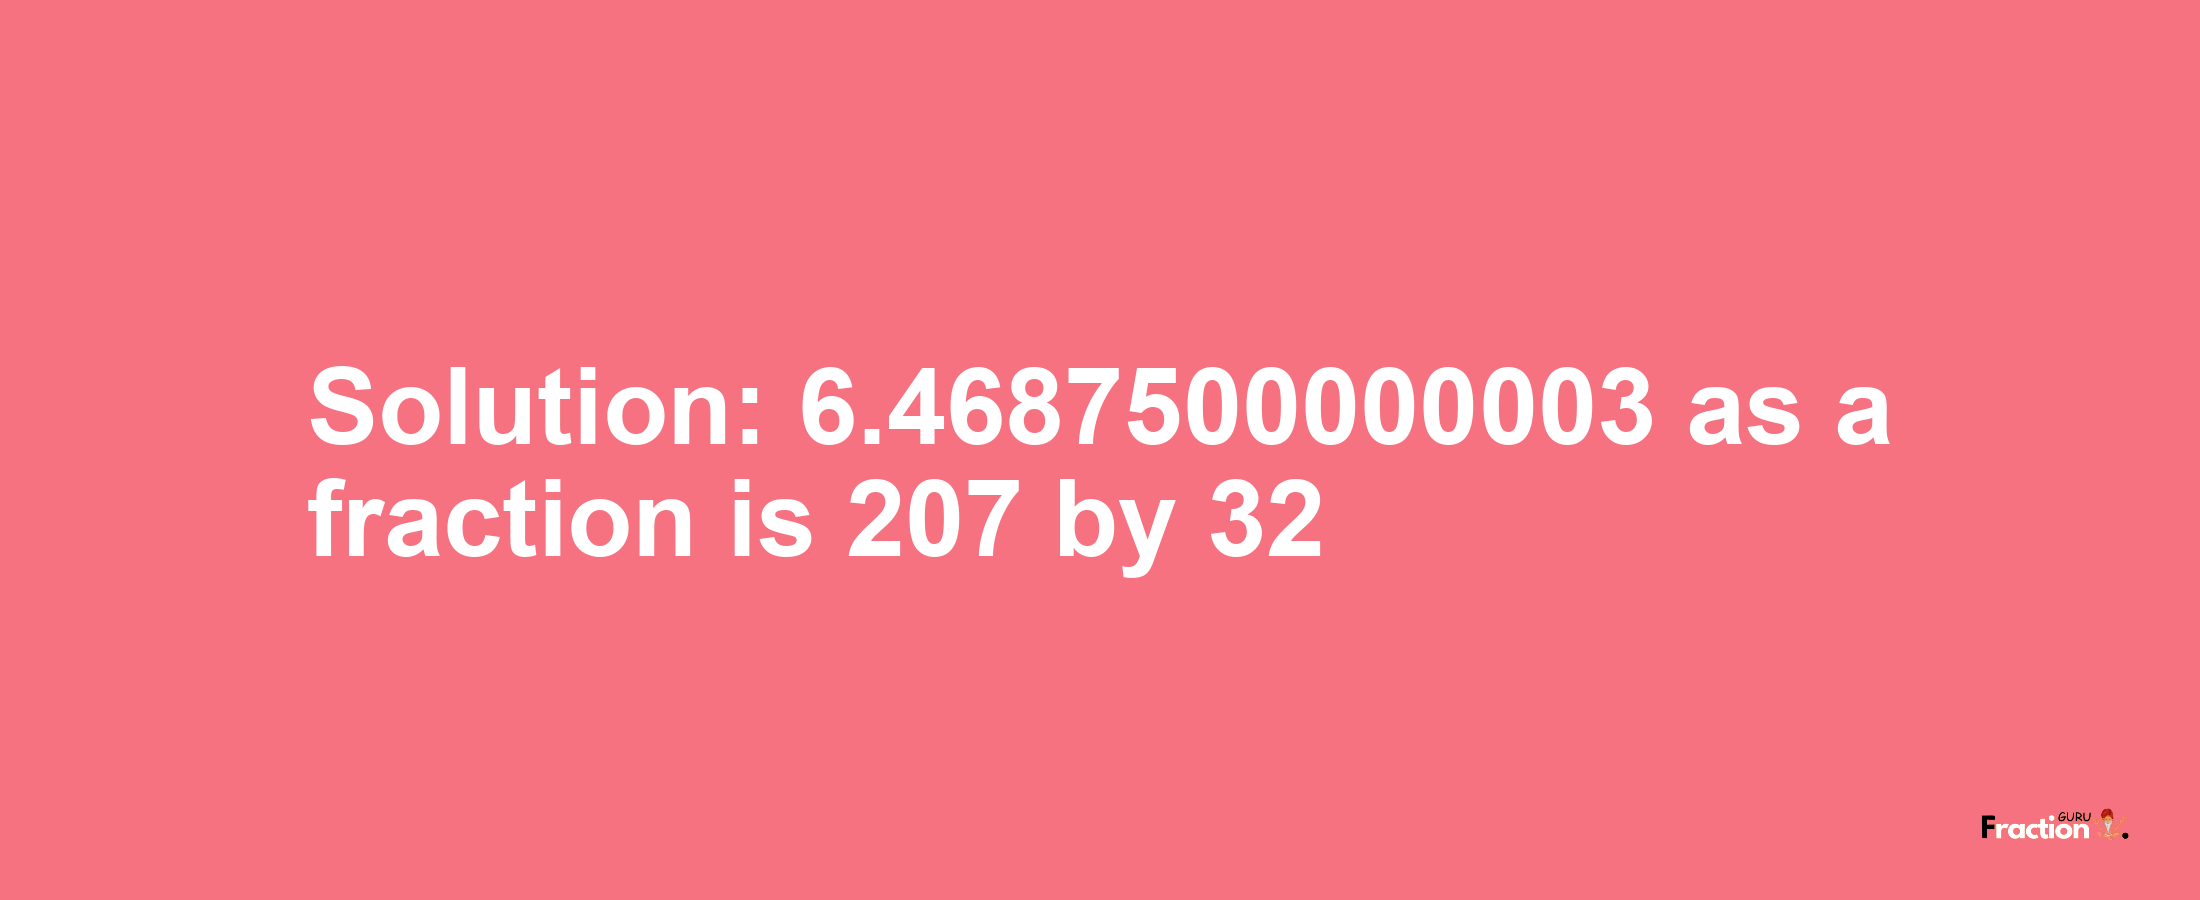 Solution:6.4687500000003 as a fraction is 207/32